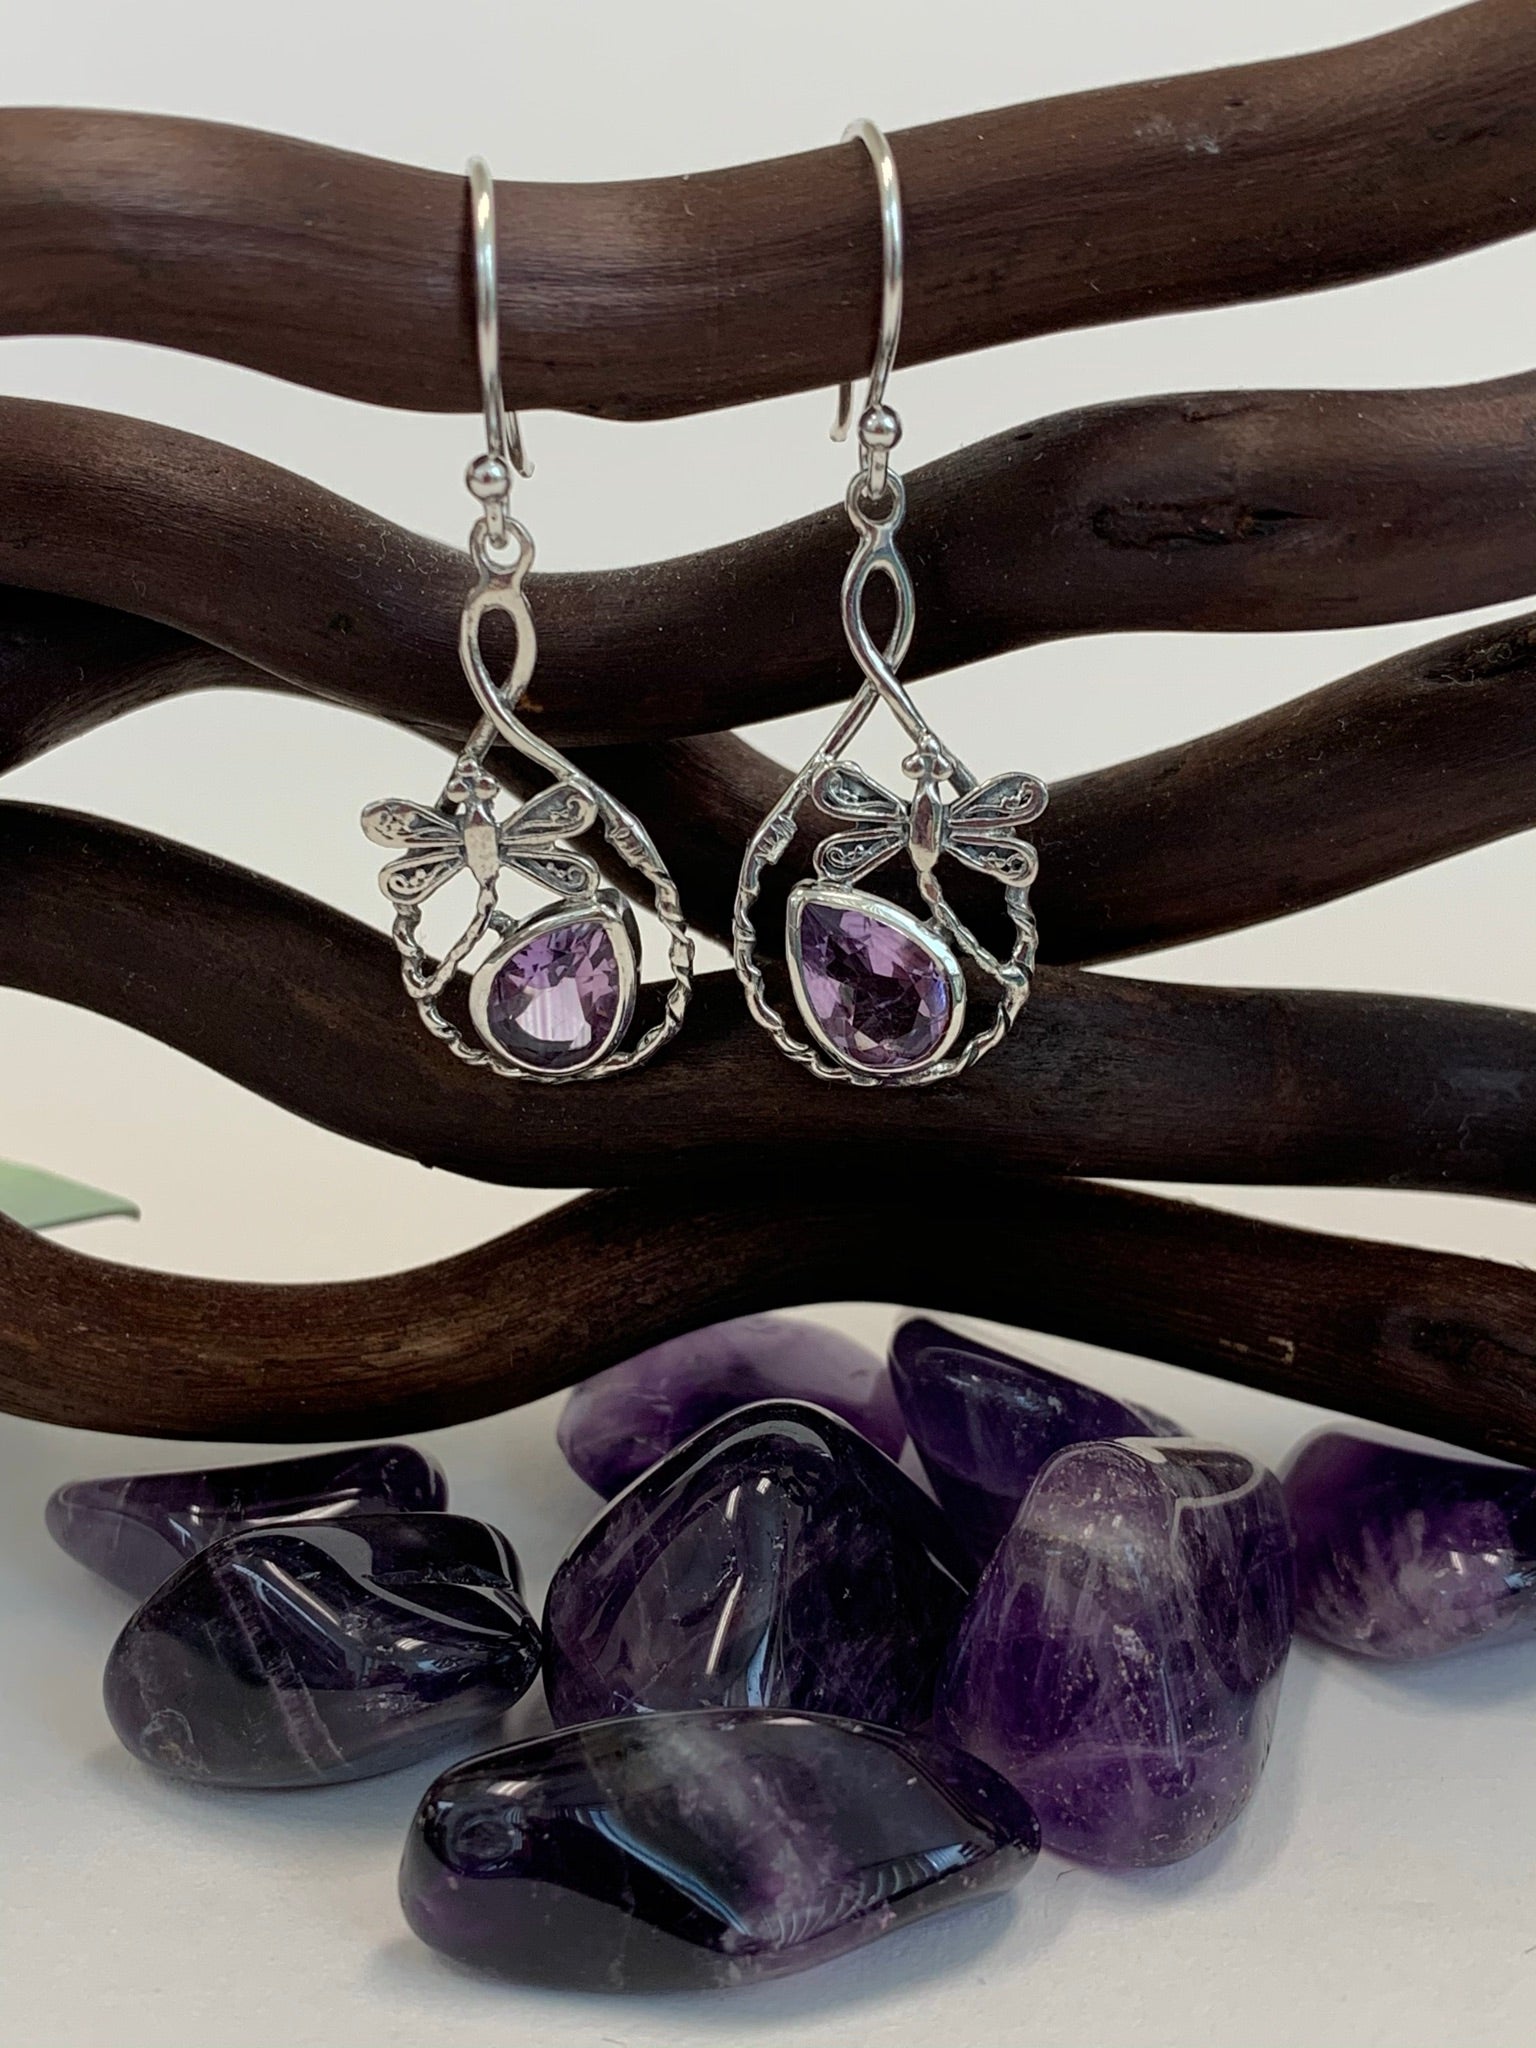 Teardrop shaped amethyst set, at a slant, at the bottom of an open tear drop shaped silver loop. sterling silver dragonflies "fly" above the amethysts. These beautiful and fanciful earrings are lightweight, have wires, not posts and are approximately 1½" long. 